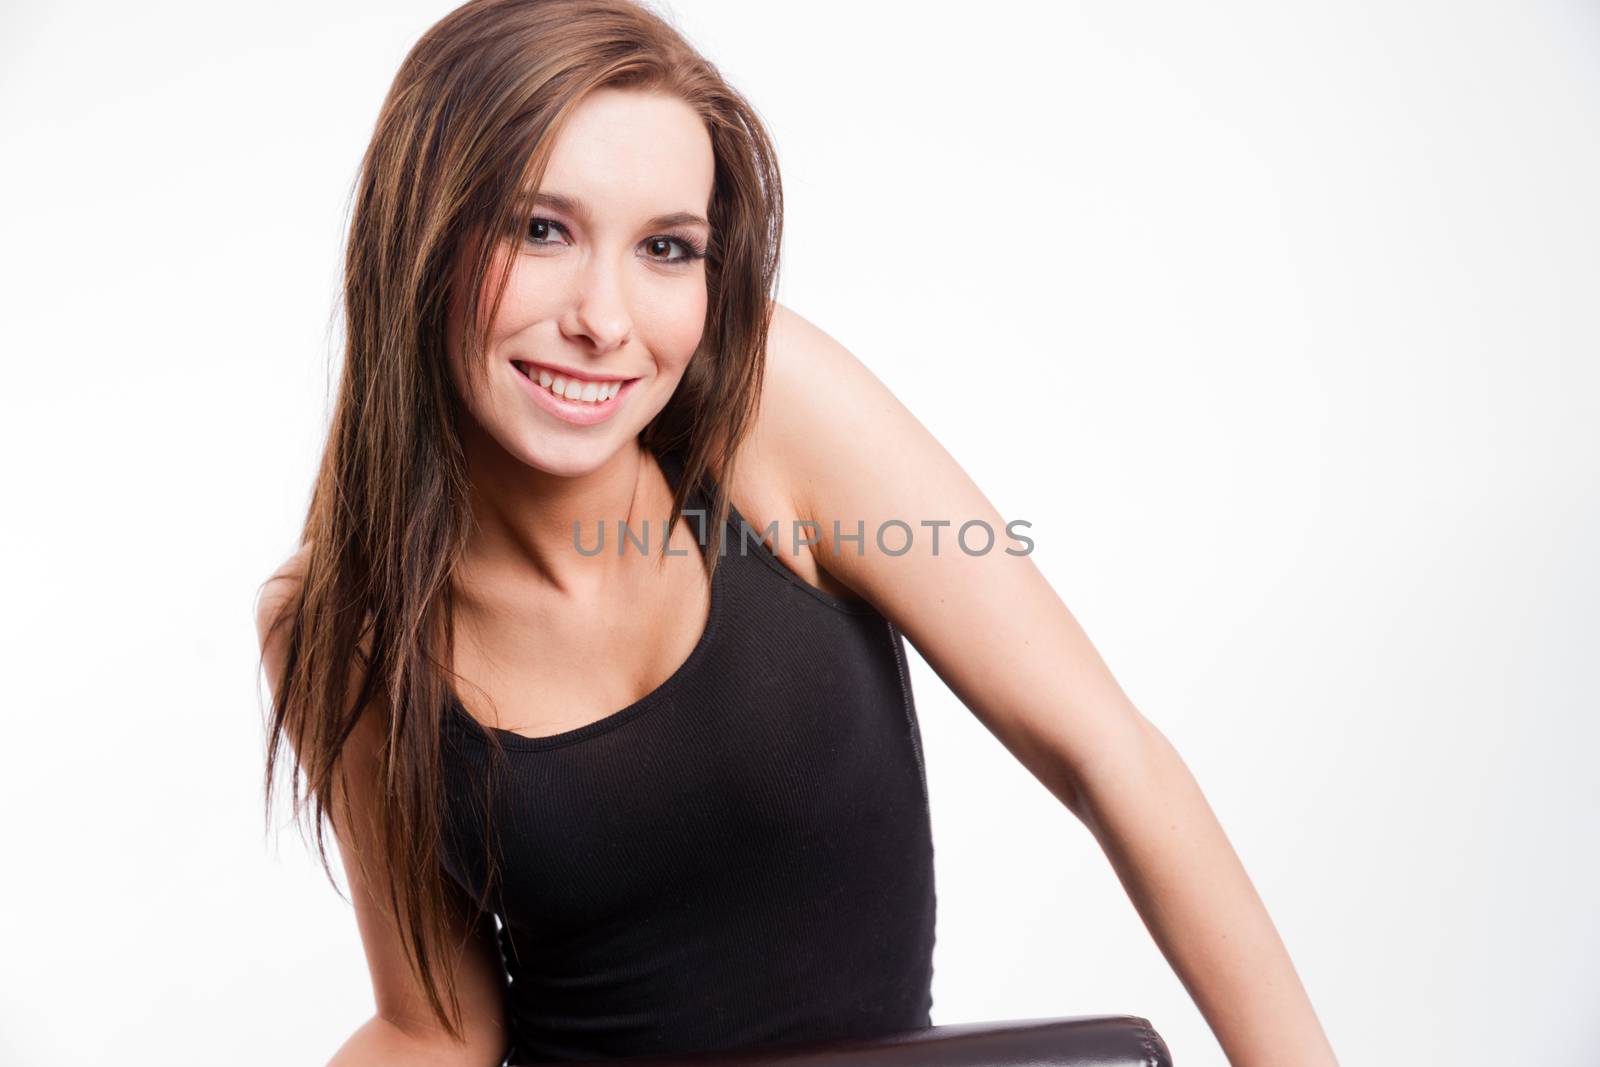 Young woman straddling common chair looking happy by ChrisBoswell